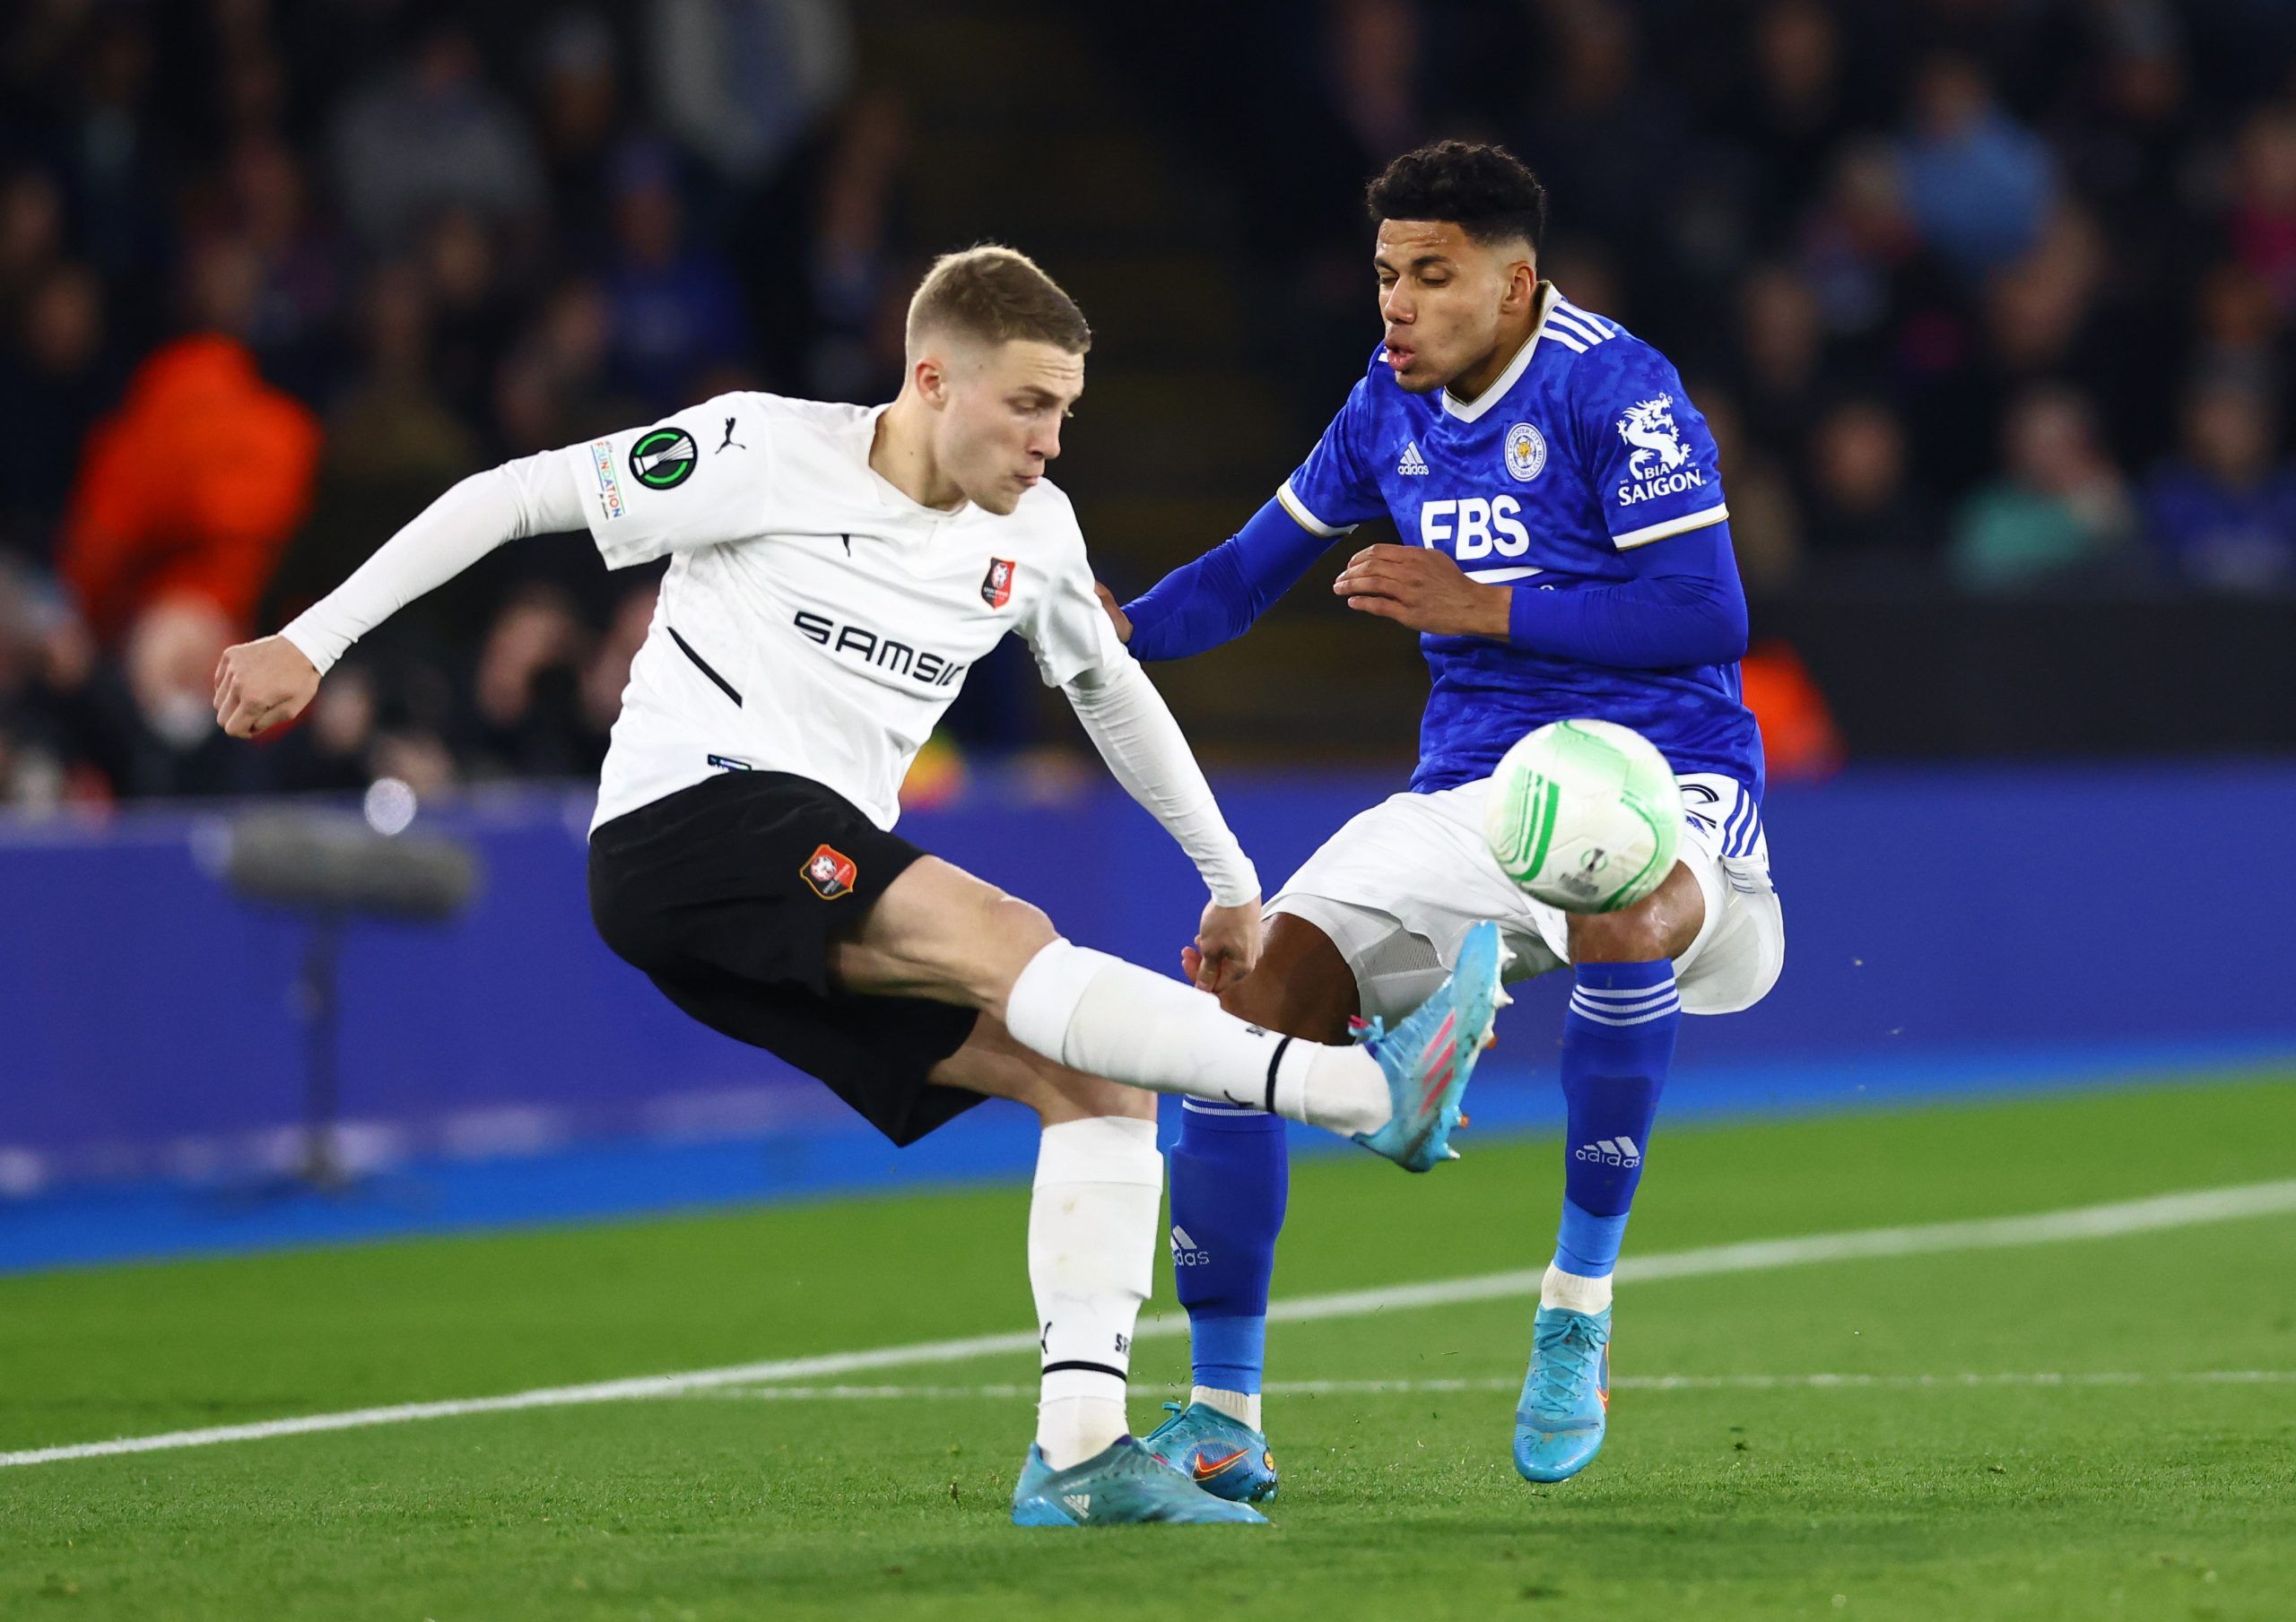 Soccer Football - Europa Conference League - Round of 16 First Leg - Leicester City v Stade Rennes - King Power Stadium, Leicester, Britain - March 10, 2022 Leicester City's James Justin in action with  Stade Rennes' Adrien Truffert REUTERS/David Klein